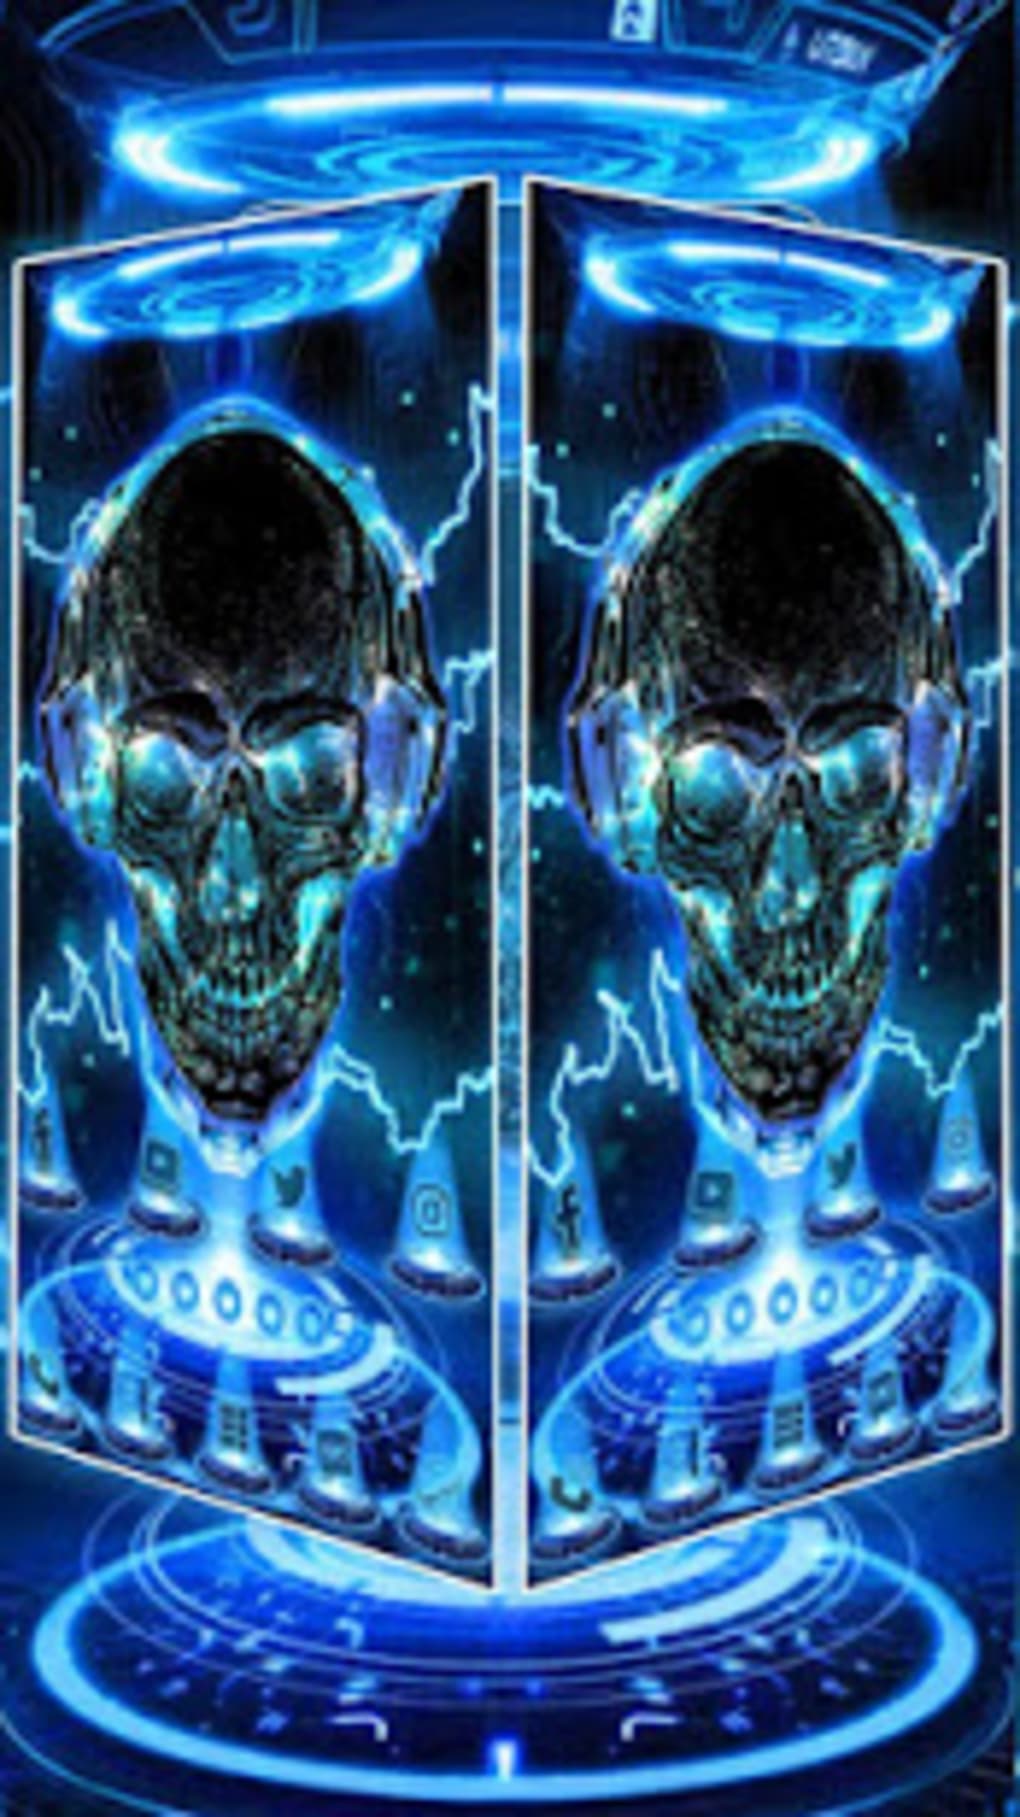 Neon Tech Skull Themes Hd Wallpapers 3d Icons - Hd Wallpaper 3d - HD Wallpaper 